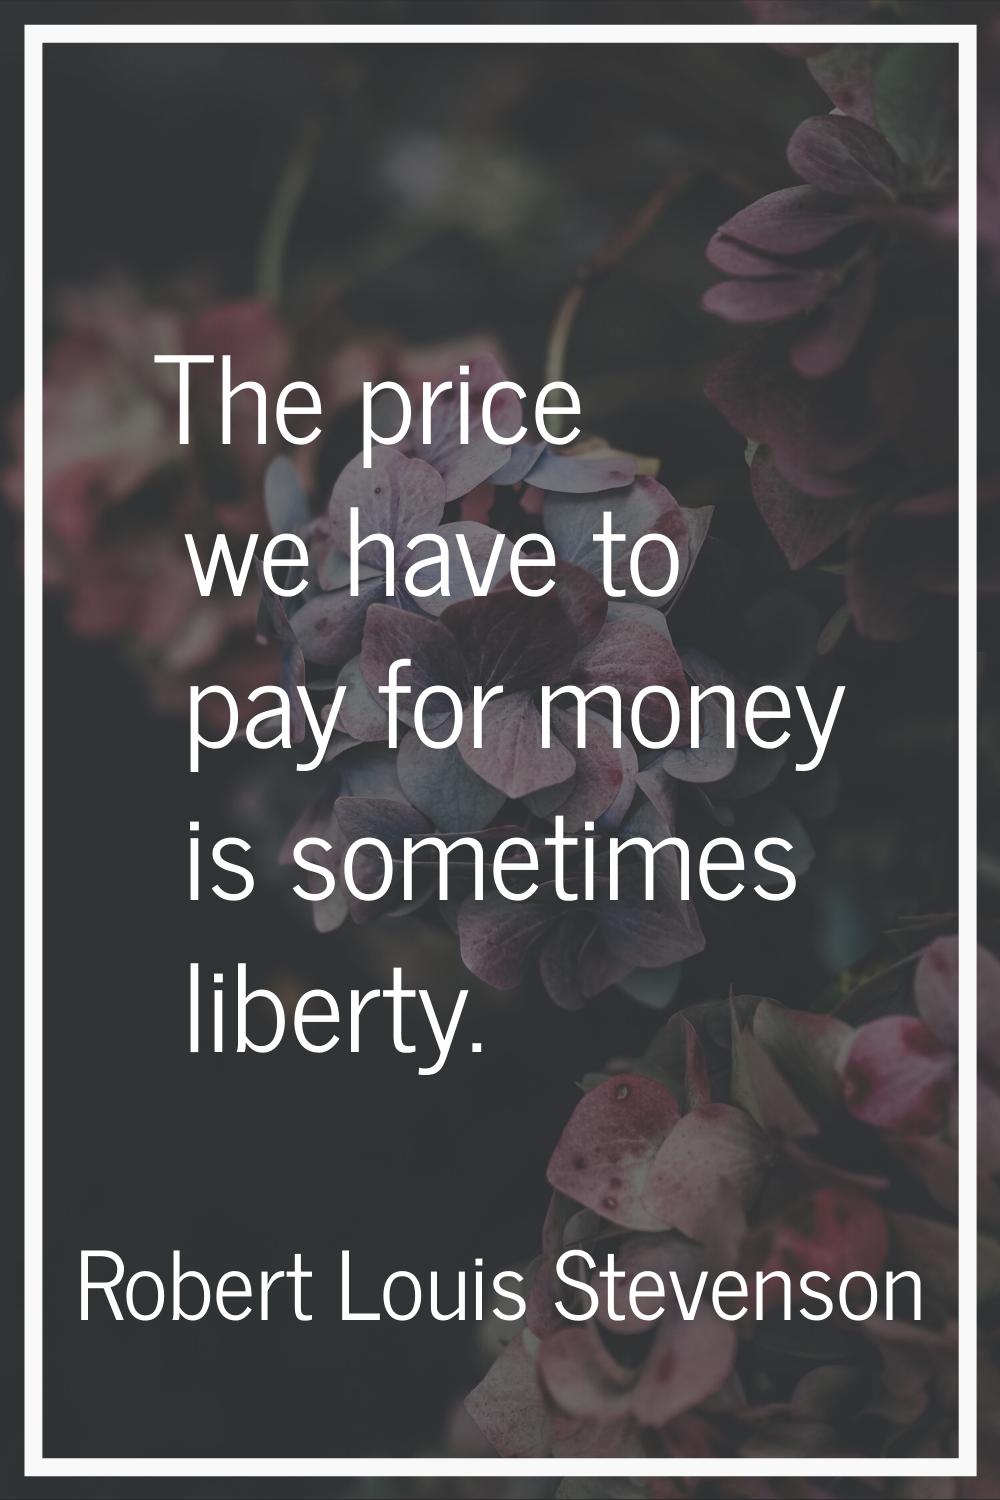 The price we have to pay for money is sometimes liberty.